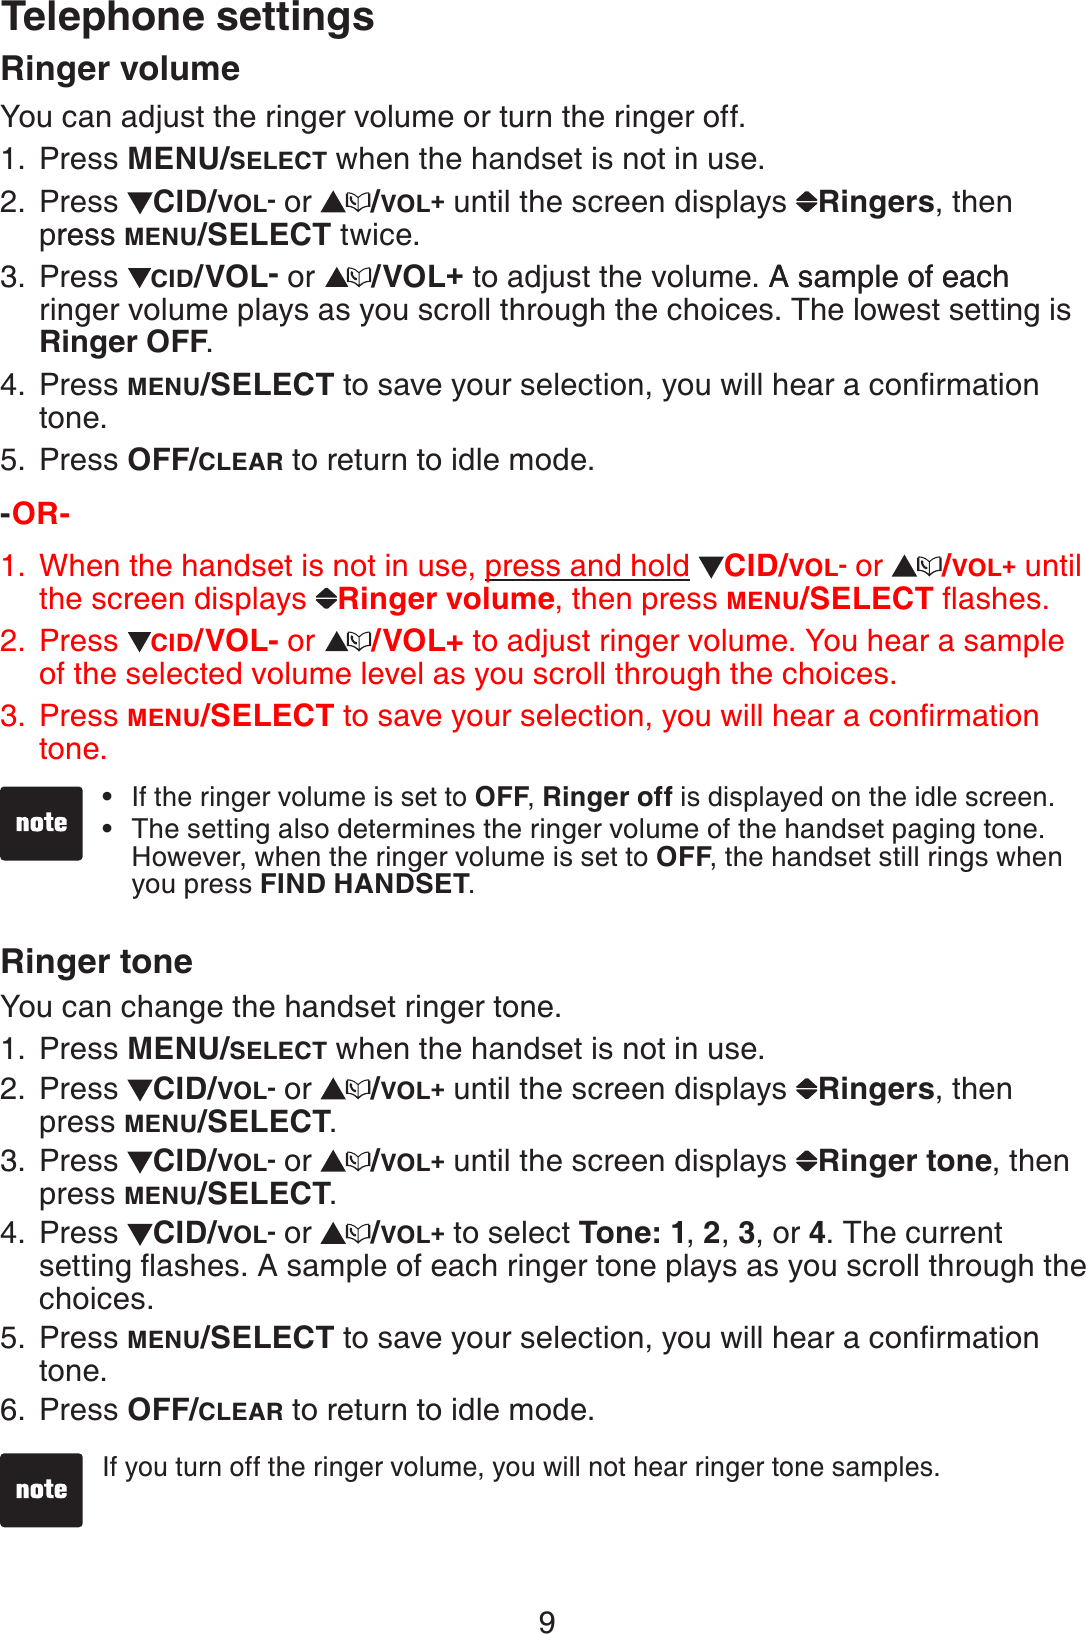 9Ringer volumeYou can adjust the ringer volume or turn the ringer off.Press MENU/SELECT when the handset is not in use. Press  CID/VOL- or  /VOL+ until the screen displays  Ringers, then pressress MENU/SELECT twice.Press  CID/VOL- or  /VOL+to adjust the volume. A sample of eachA sample of each ringer volume plays as you scroll through the choices. The lowest setting is Ringer OFF.Press MENU/SELECTVQUCXG[QWTUGNGEVKQP[QWYKNNJGCTCEQPſTOCVKQPtone.Press OFF/CLEAR to return to idle mode.-OR-        When the handset is not in use, press and hold CID/VOL- or  /VOL+ until the screen displays  Ringer volume, then press MENU/SELECTƀCUJGUPress CID/VOL- or  /VOL+ to adjust ringer volume. You hear a sample of the selected volume level as you scroll through the choices.Press MENU/SELECTVQUCXG[QWTUGNGEVKQP[QWYKNNJGCTCEQPſTOCVKQPtone. Ringer toneYou can change the handset ringer tone.Press MENU/SELECT when the handset is not in use.Press  CID/VOL- or  /VOL+ until the screen displays  Ringers, then press MENU/SELECT.Press  CID/VOL- or  /VOL+ until the screen displays  Ringer tone, then press MENU/SELECT.Press  CID/VOL- or  /VOL+ to select Tone: 1,2, 3, or 4. The current UGVVKPIƀCUJGU#UCORNGQHGCEJTKPIGTVQPGRNC[UCU[QWUETQNNVJTQWIJVJGchoices.Press MENU/SELECTVQUCXG[QWTUGNGEVKQP[QWYKNNJGCTCEQPſTOCVKQPtone.Press OFF/CLEAR to return to idle mode.1.2.3.4.5.1.2.3.1.2.3.4.5.6.Telephone settingsIf the ringer volume is set to OFF,Ringer off is displayed on the idle screen.The setting also determines the ringer volume of the handset paging tone. However, when the ringer volume is set to OFF, the handset still rings when you press FIND HANDSET.••If you turn off the ringer volume, you will not hear ringer tone samples.•